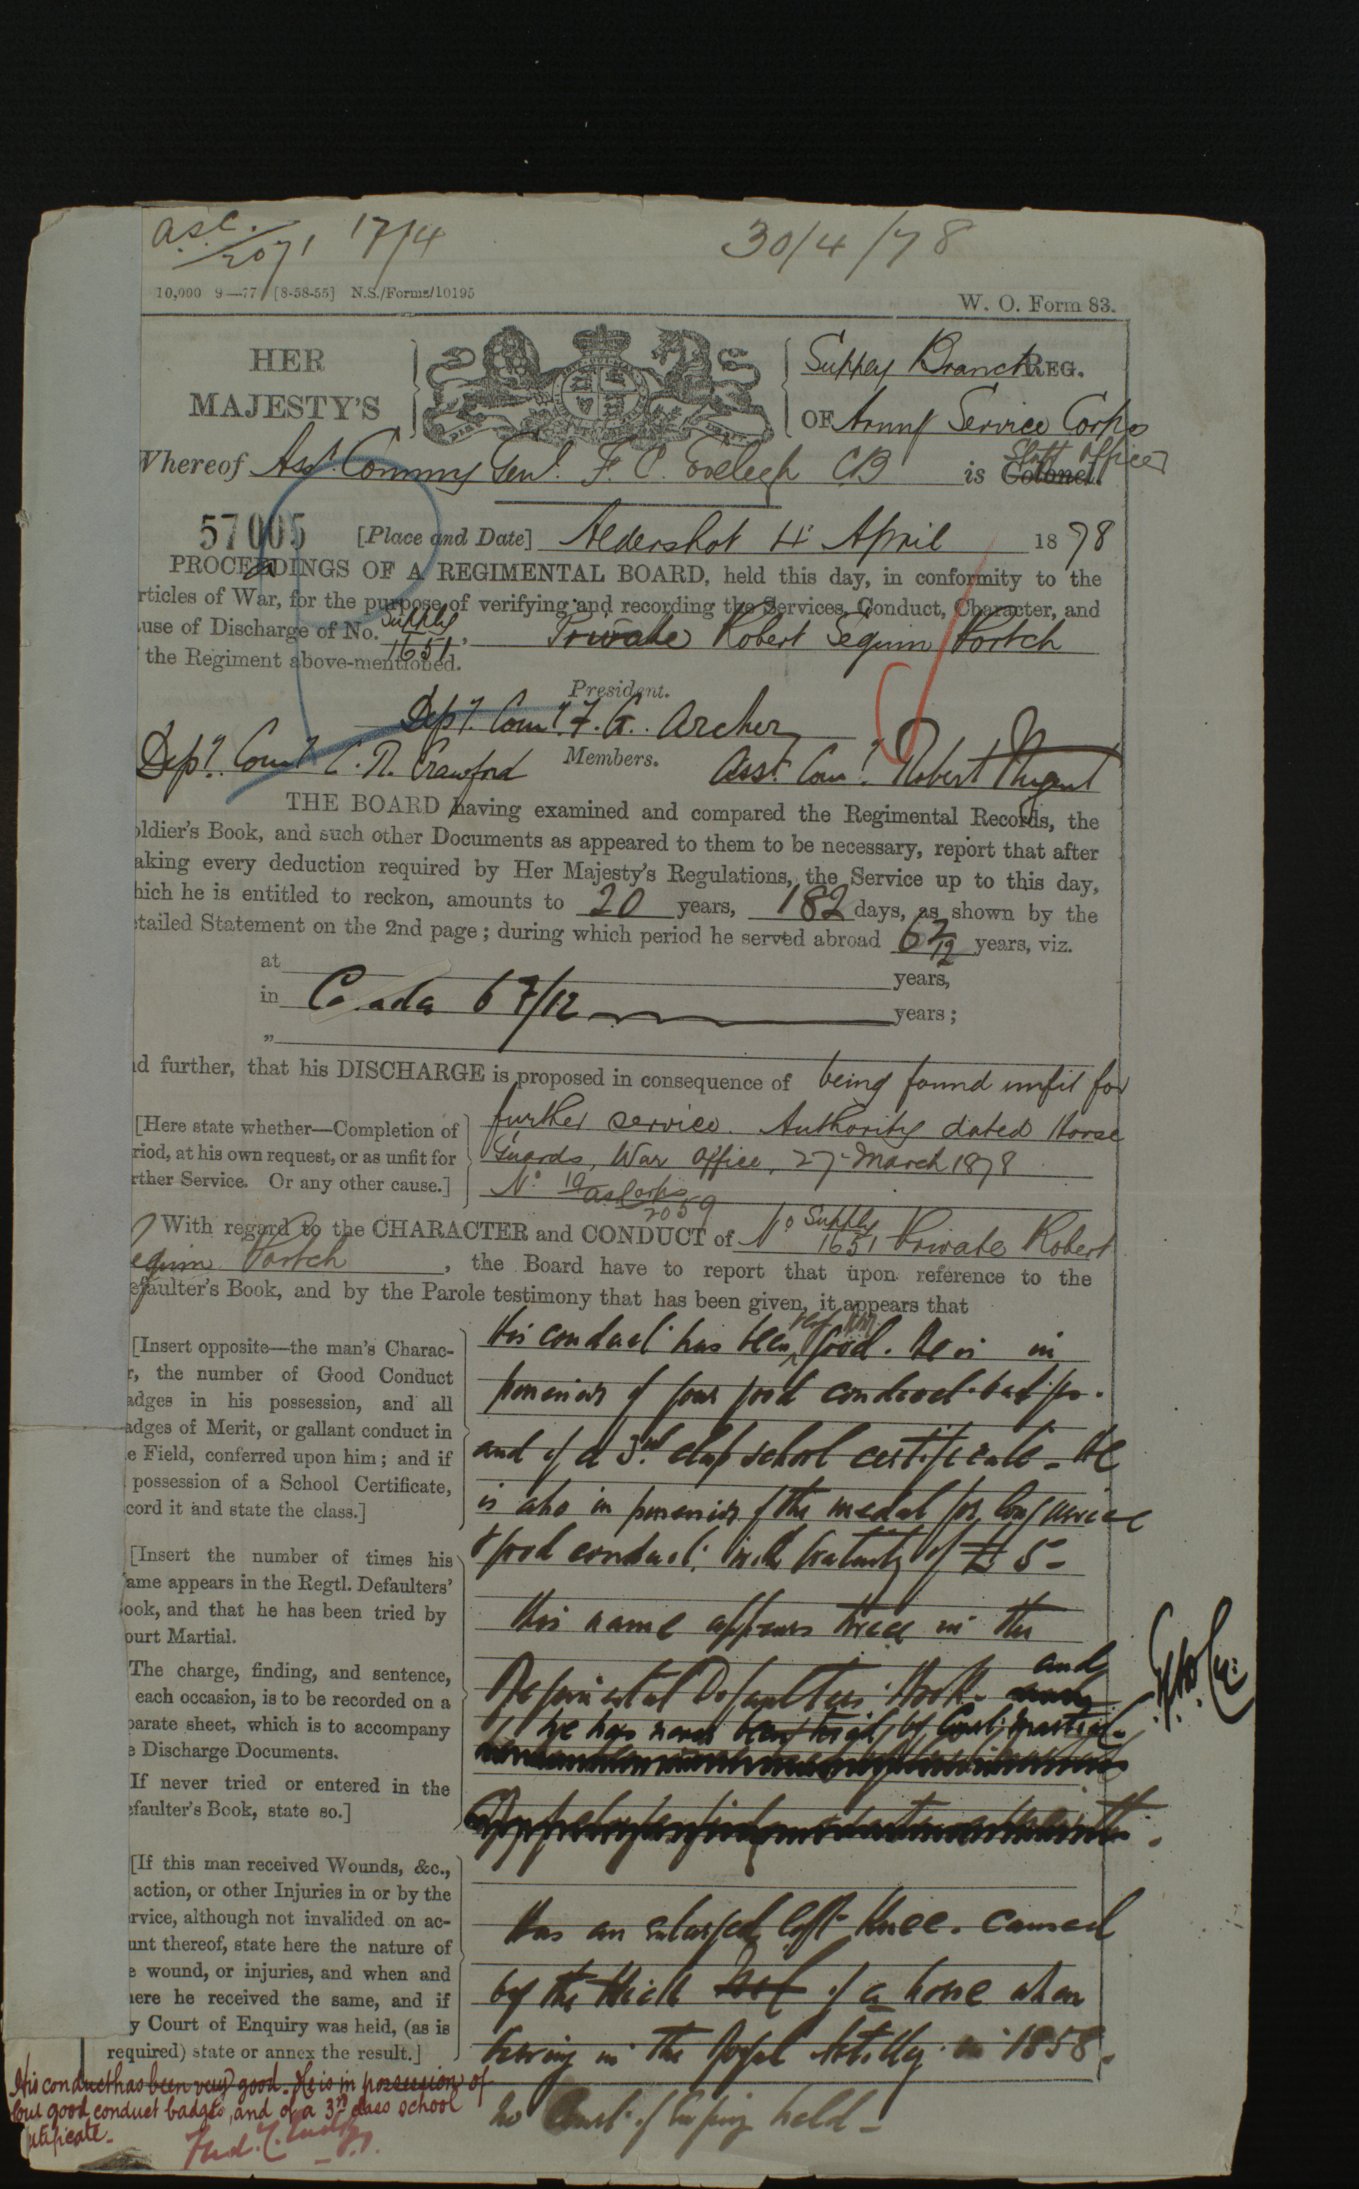 1878 discharge papers for Robert Seguin Portch shows he served 20+ years, including 6 in Canada but was unfit for further service